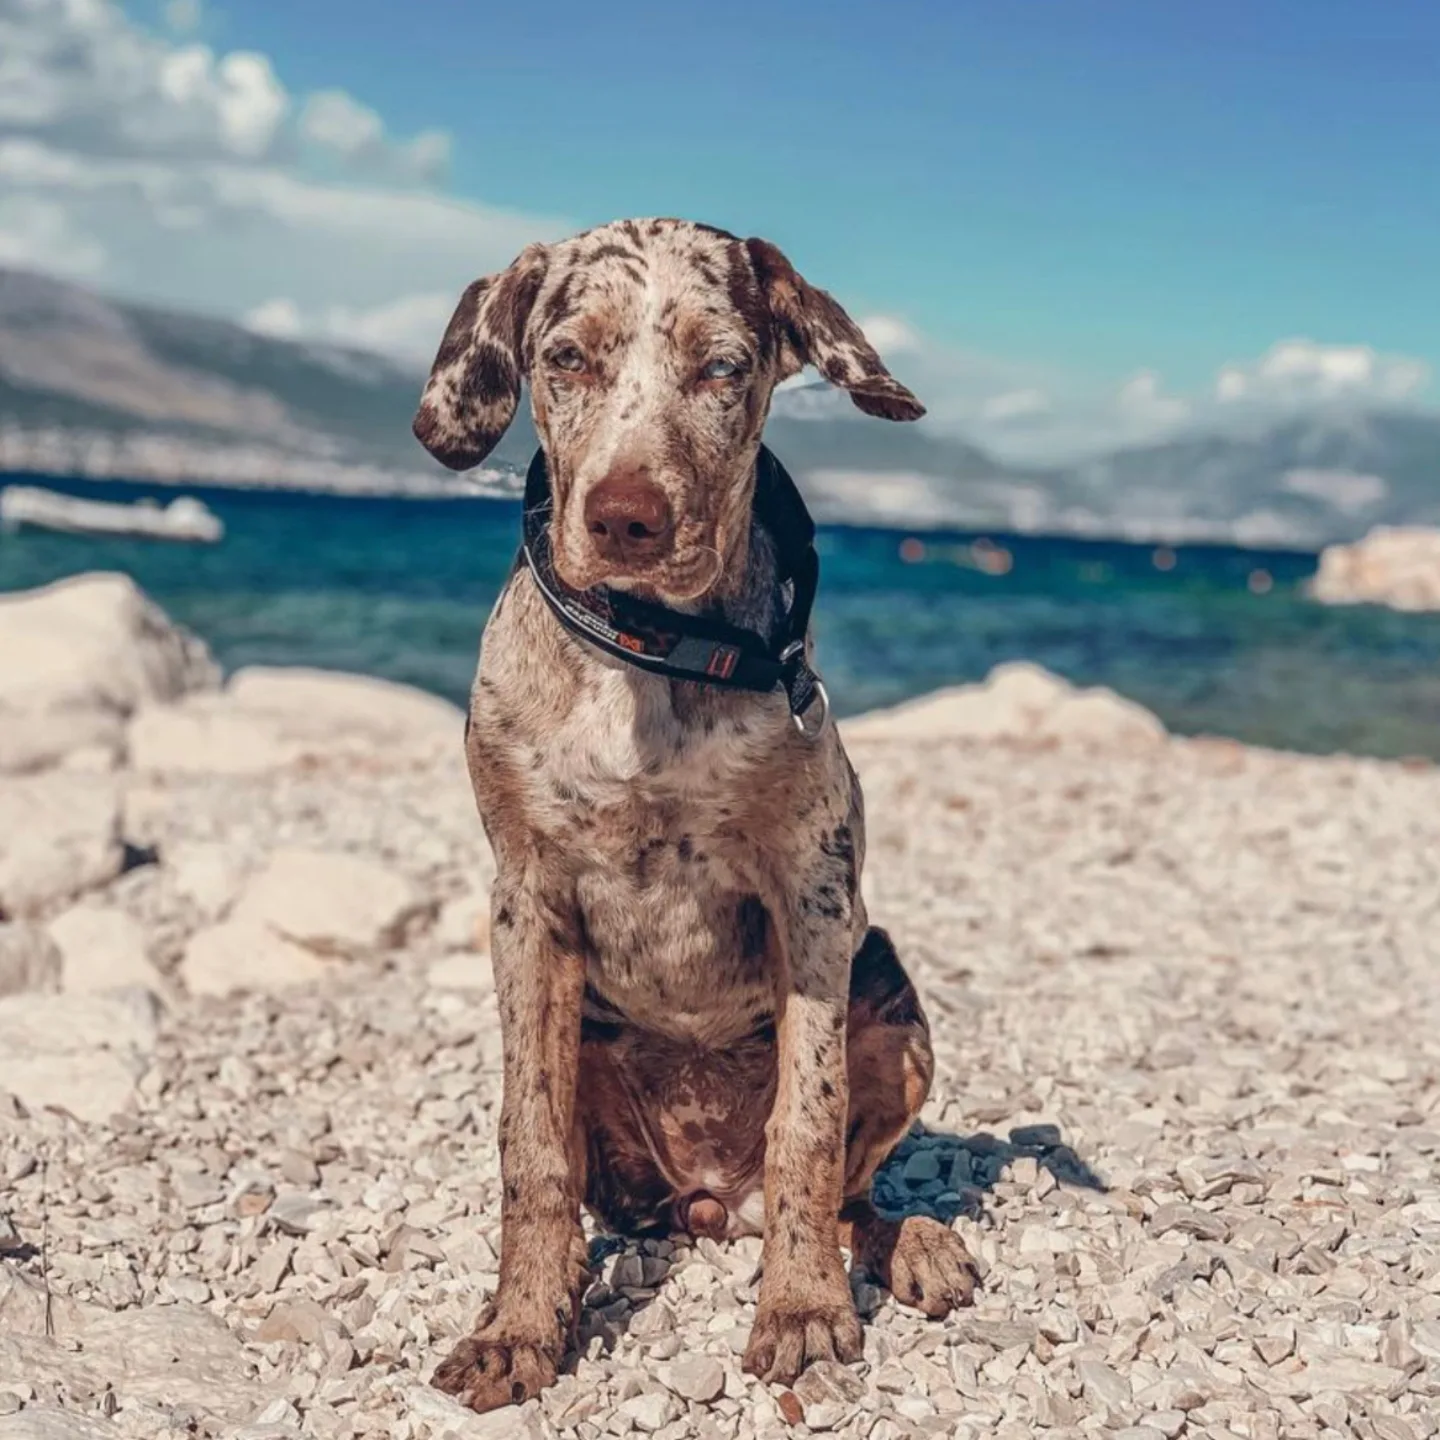 A Catahoula Leopard Dog enjoying his day at the beach with owners